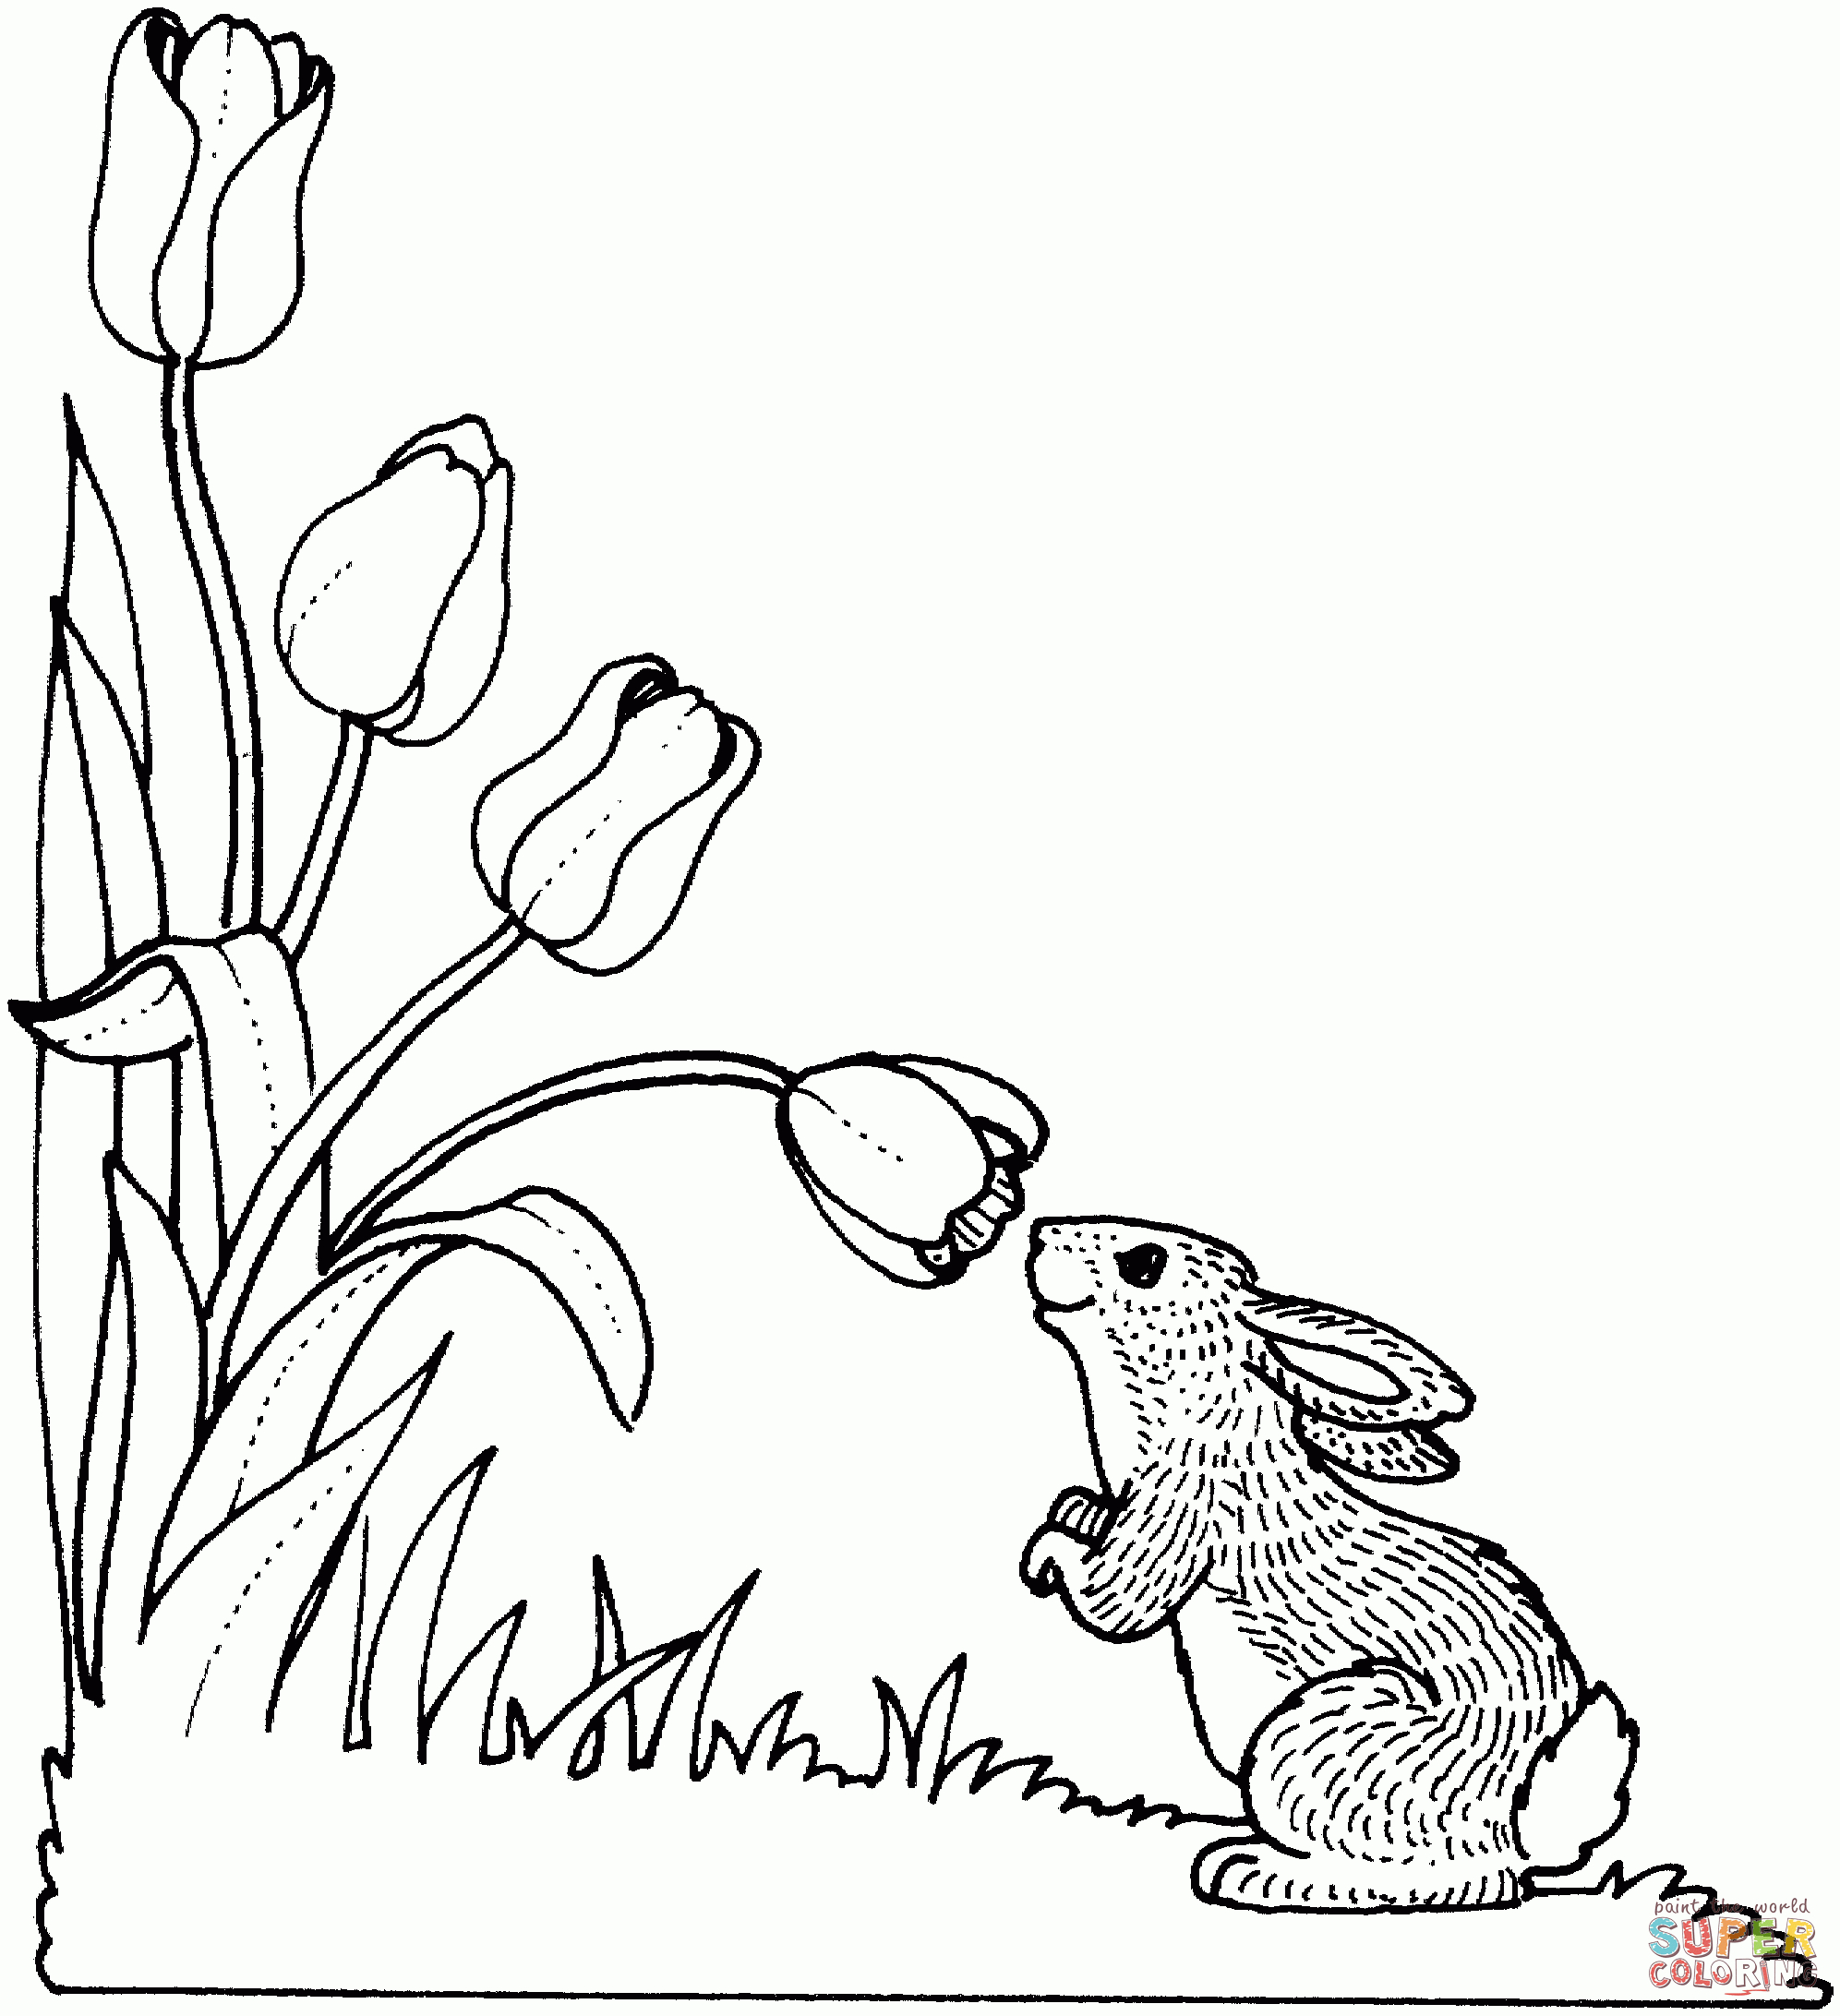 Tulip Coloring Pages | Free Coloring Pages - Free Printable Tulip Coloring Pages